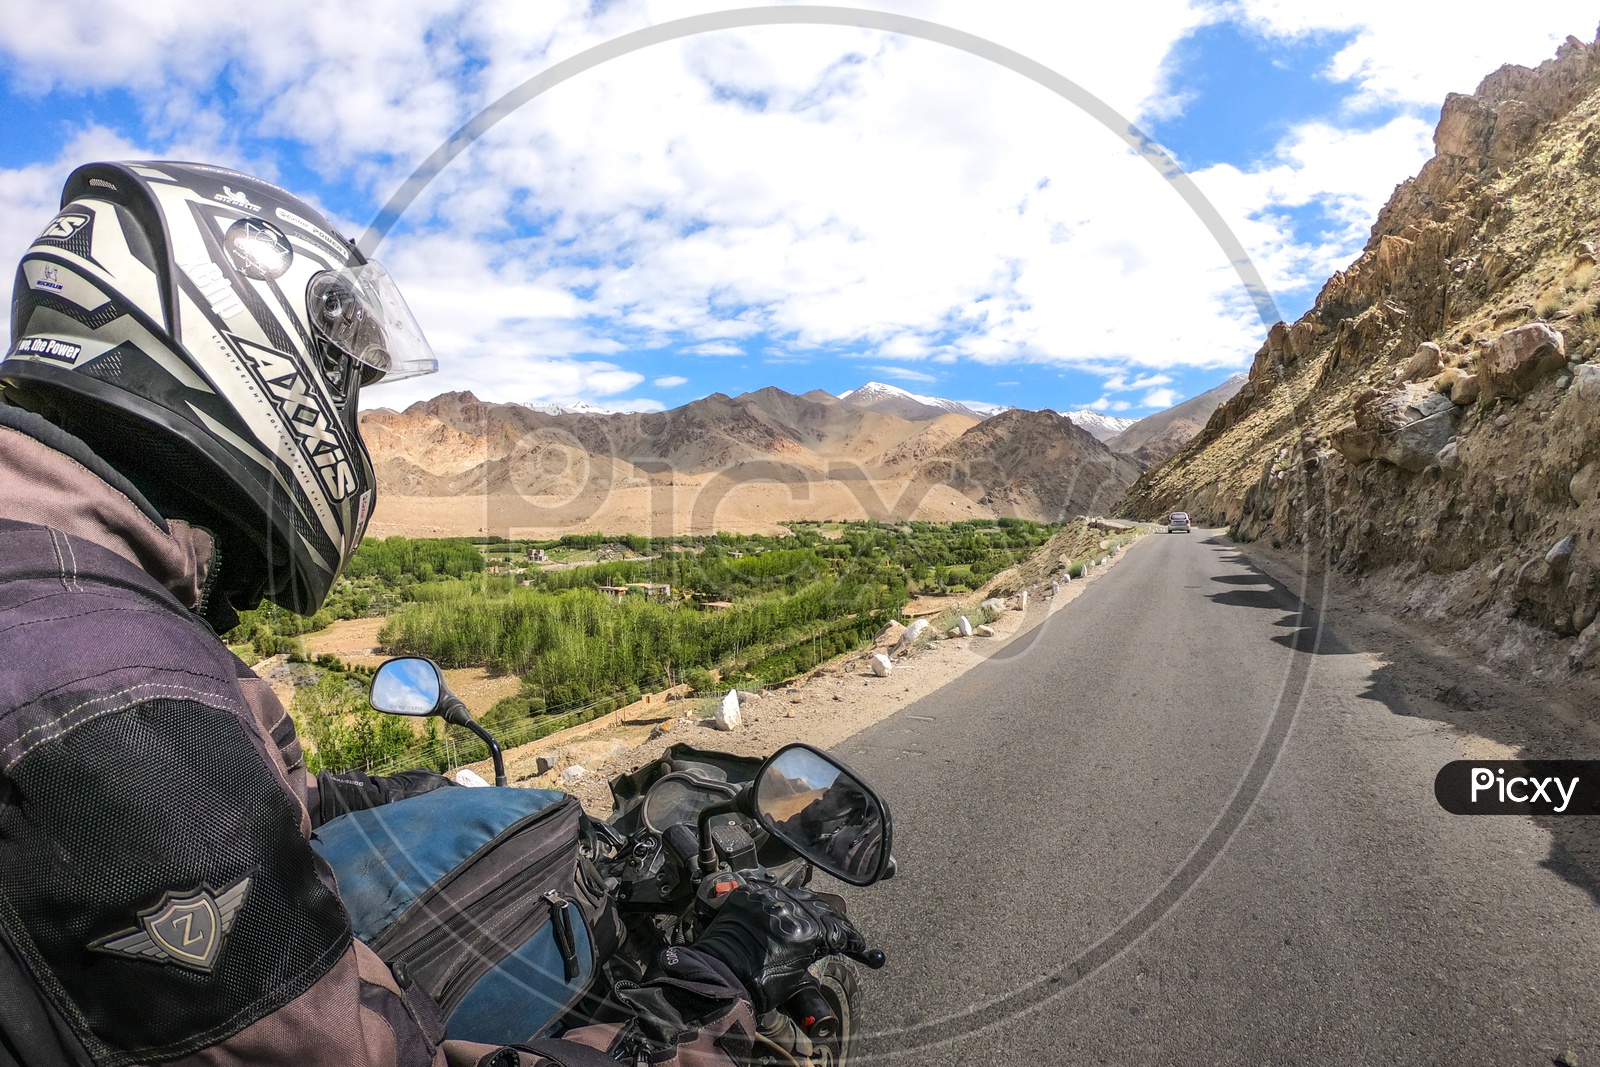 An Adventurer Tourist Biker On the Valley Roads Of Leh With a View Of Snow Capped Mountains